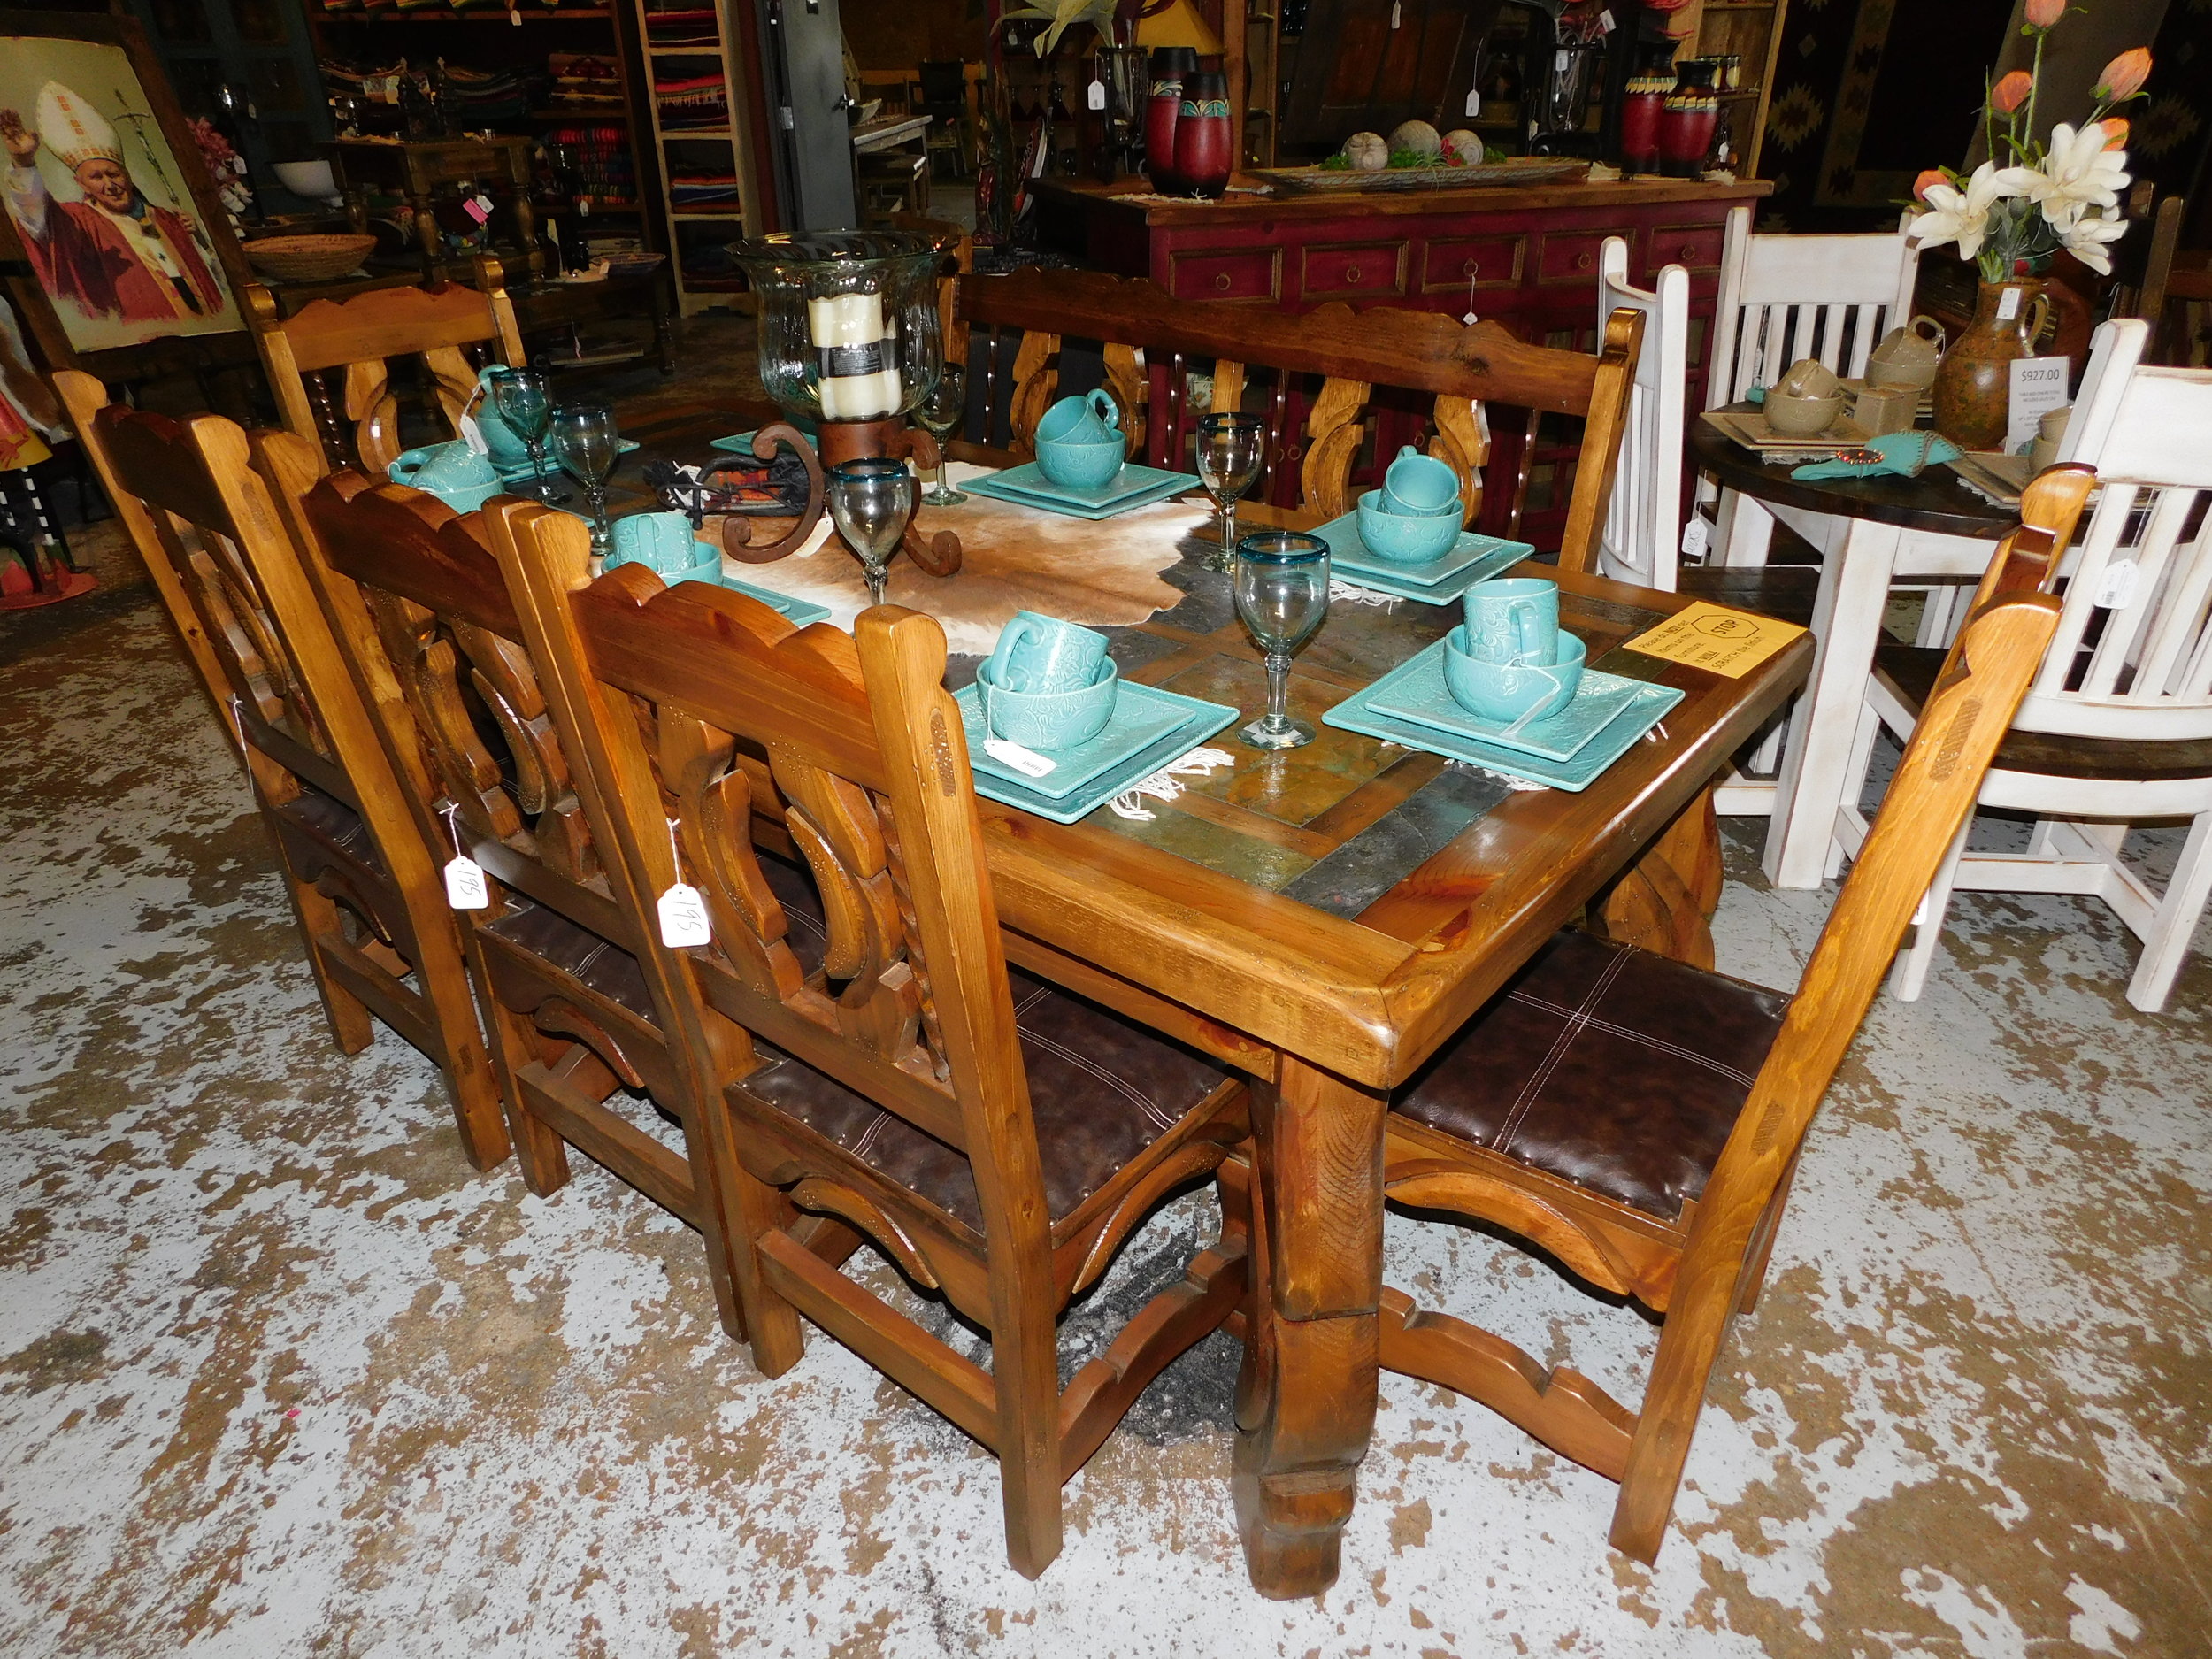 Slate Tile Top Dining Table Casa Decor, Tile Kitchen Table And Chairs